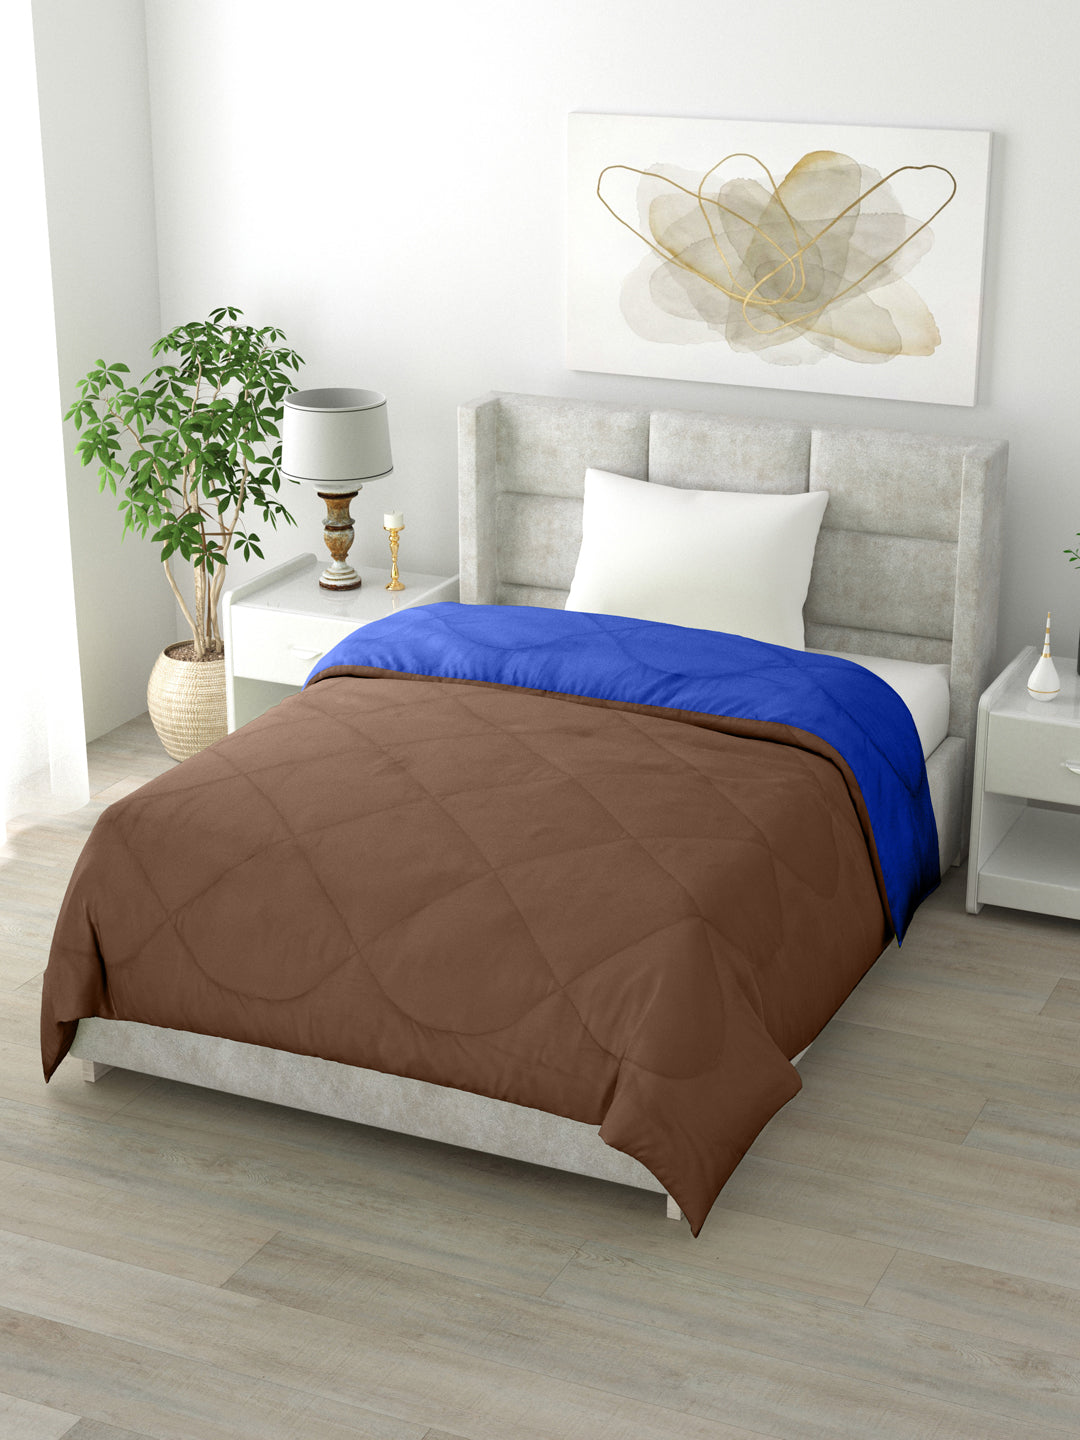 Reversible Single Bed Comforter 200 GSM 60x90 Inches (Blue & Brown)